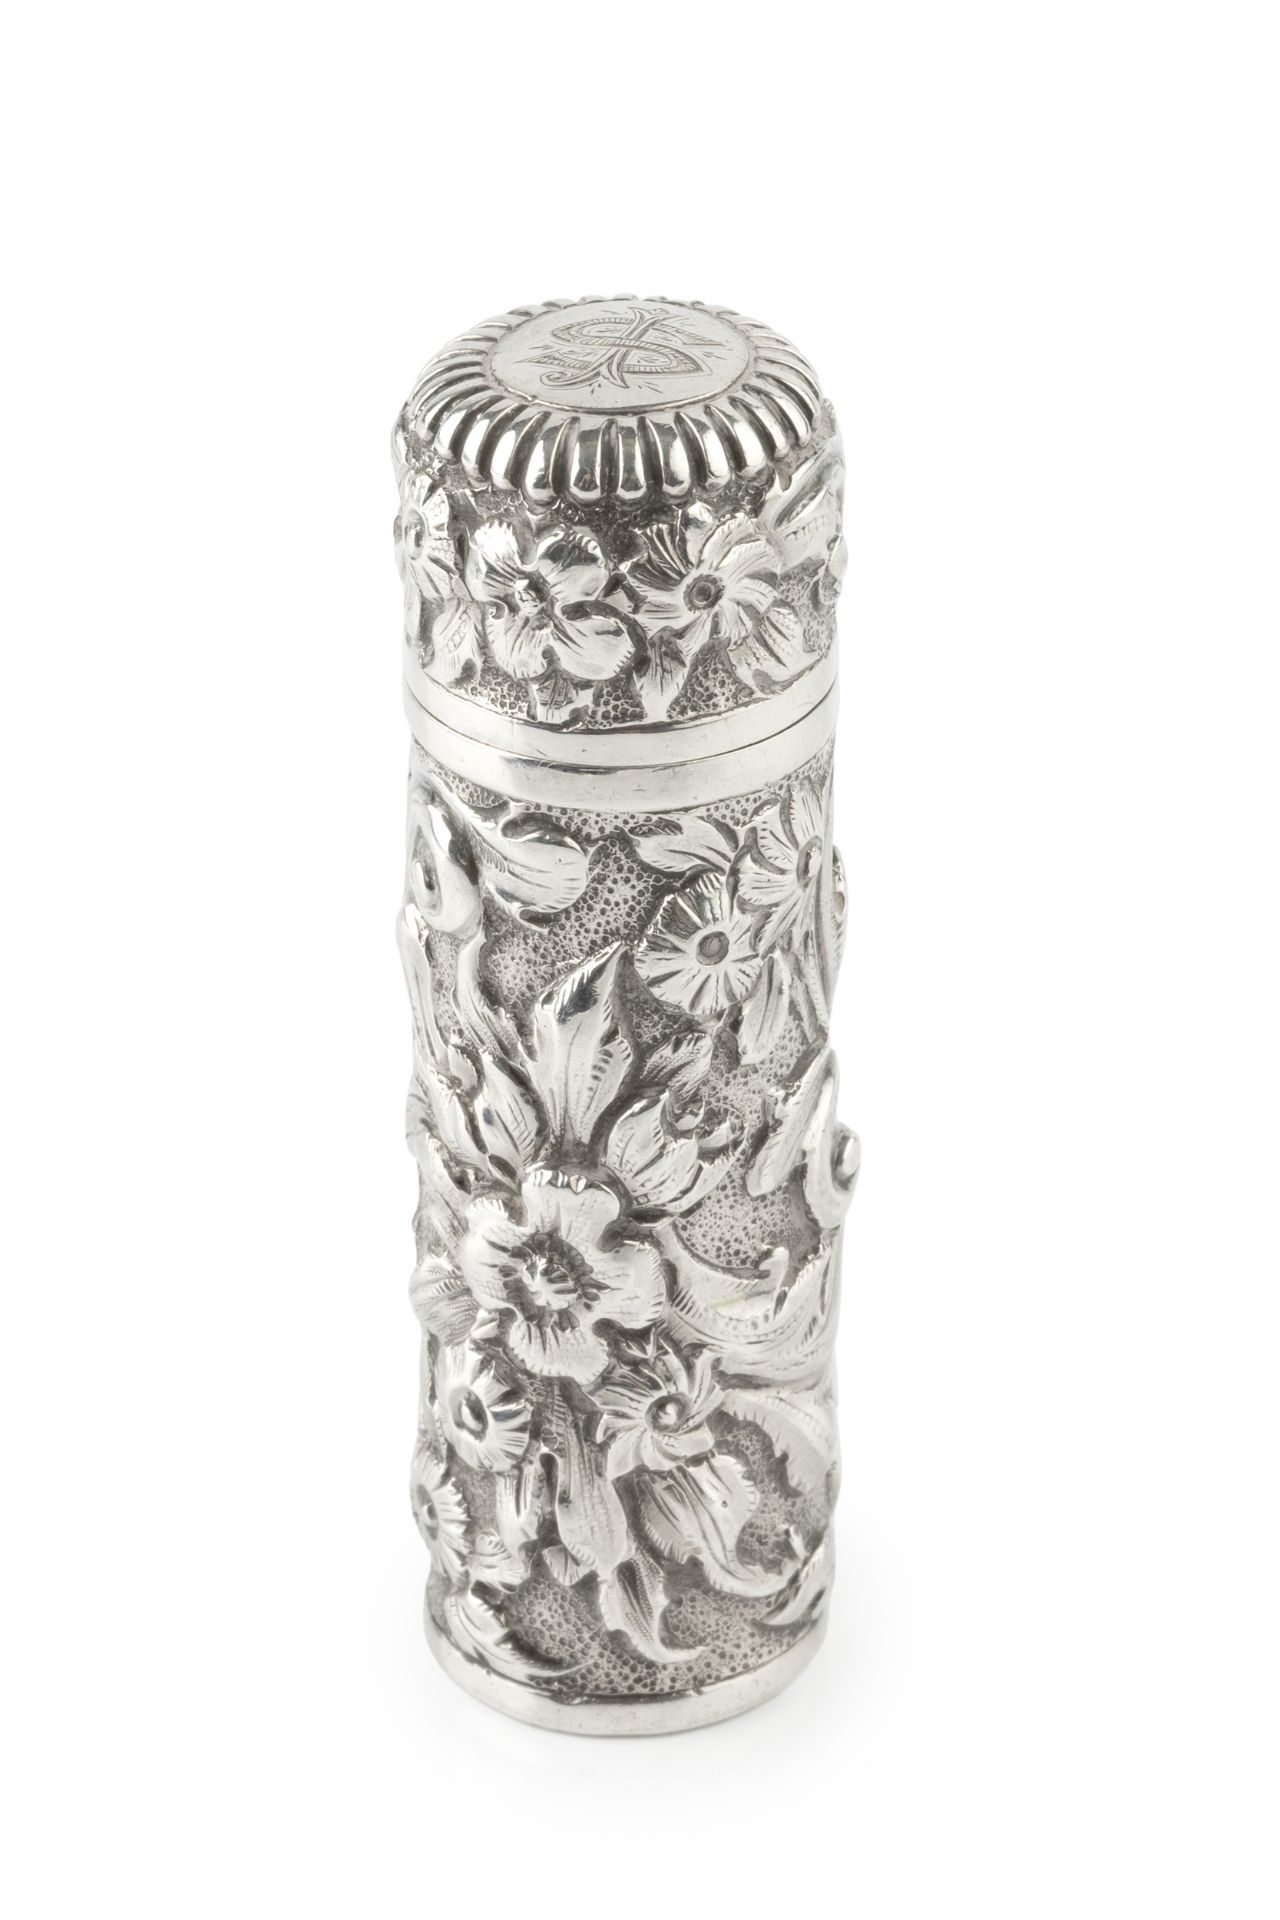 A late Victorian silver cylindrical scent bottle, embossed and engraved with stylised scrolling